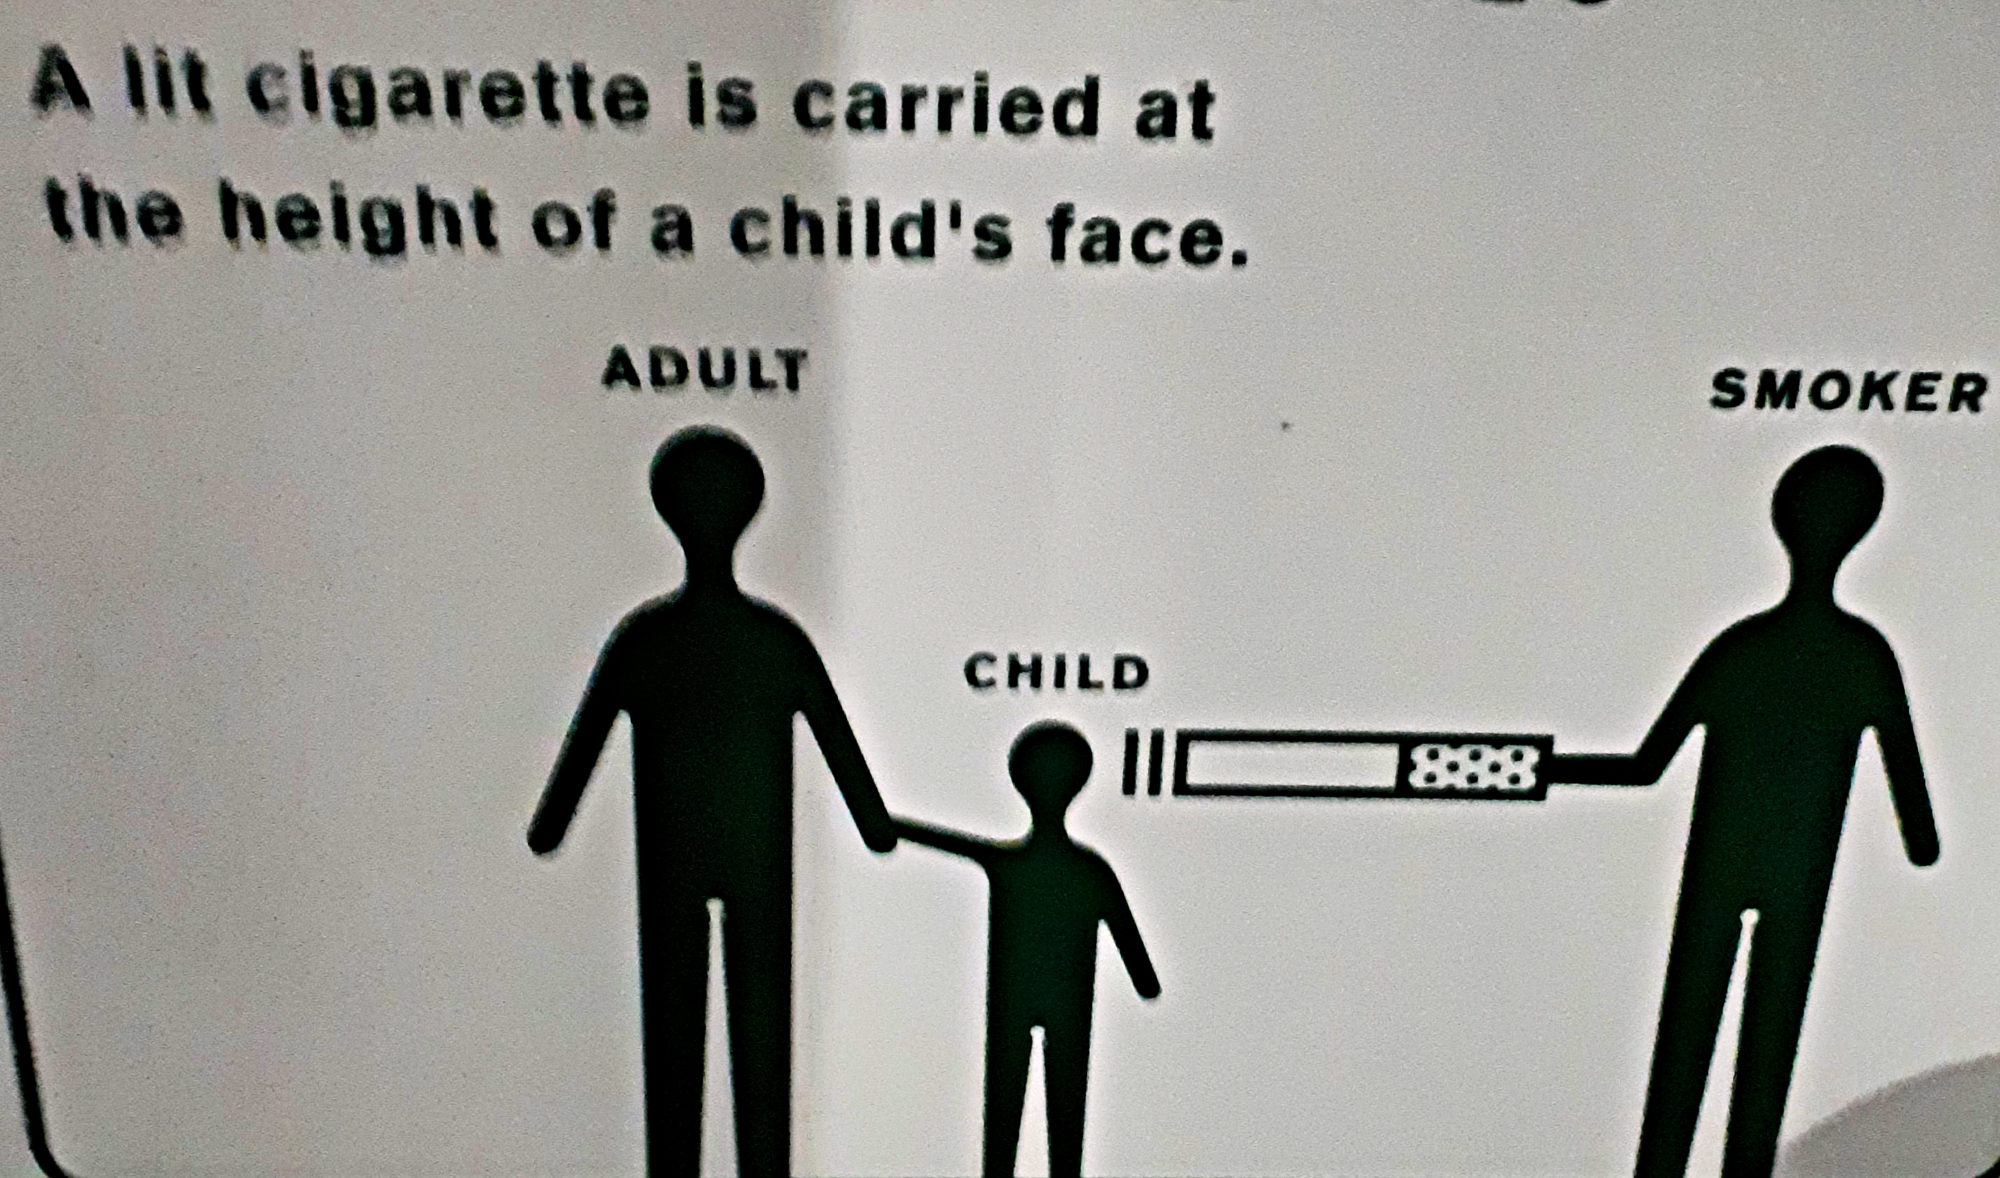 A lit cigarette is carried at the height of a child's face